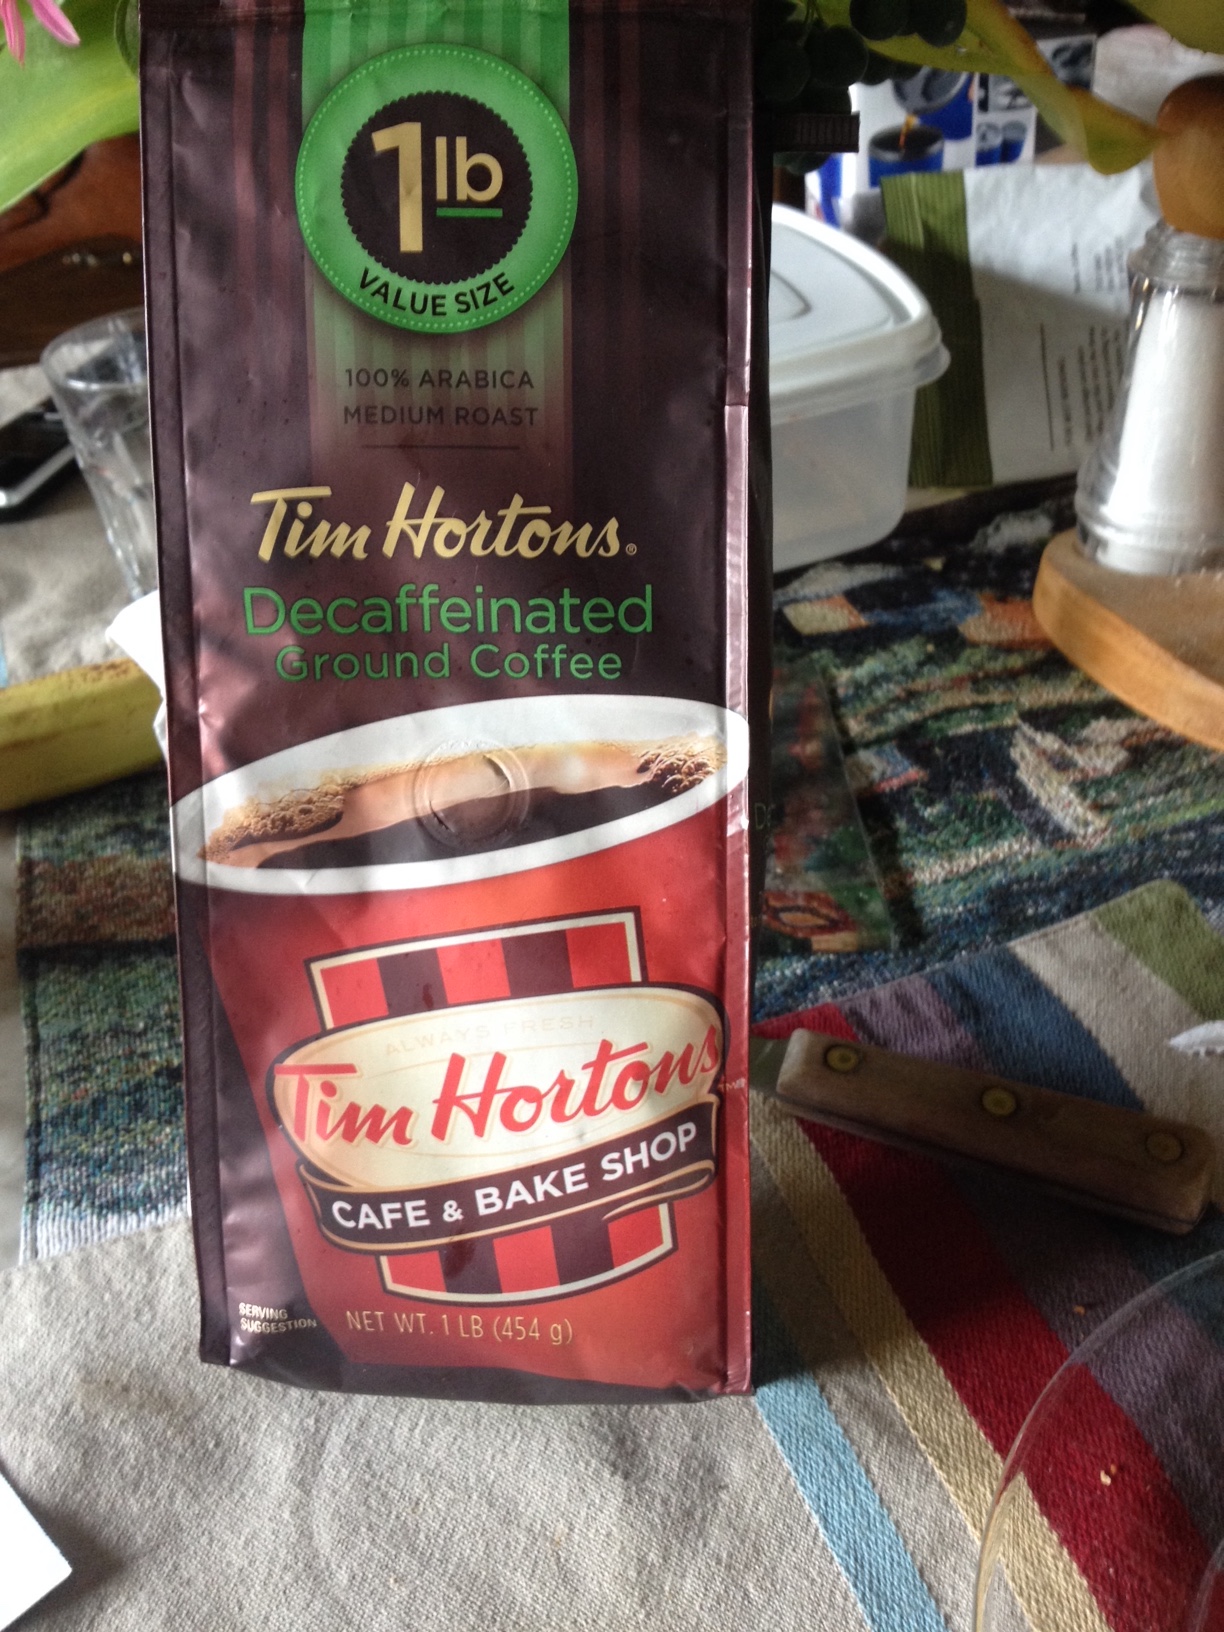 Photo showing Tim Horton's decaf ground coffee